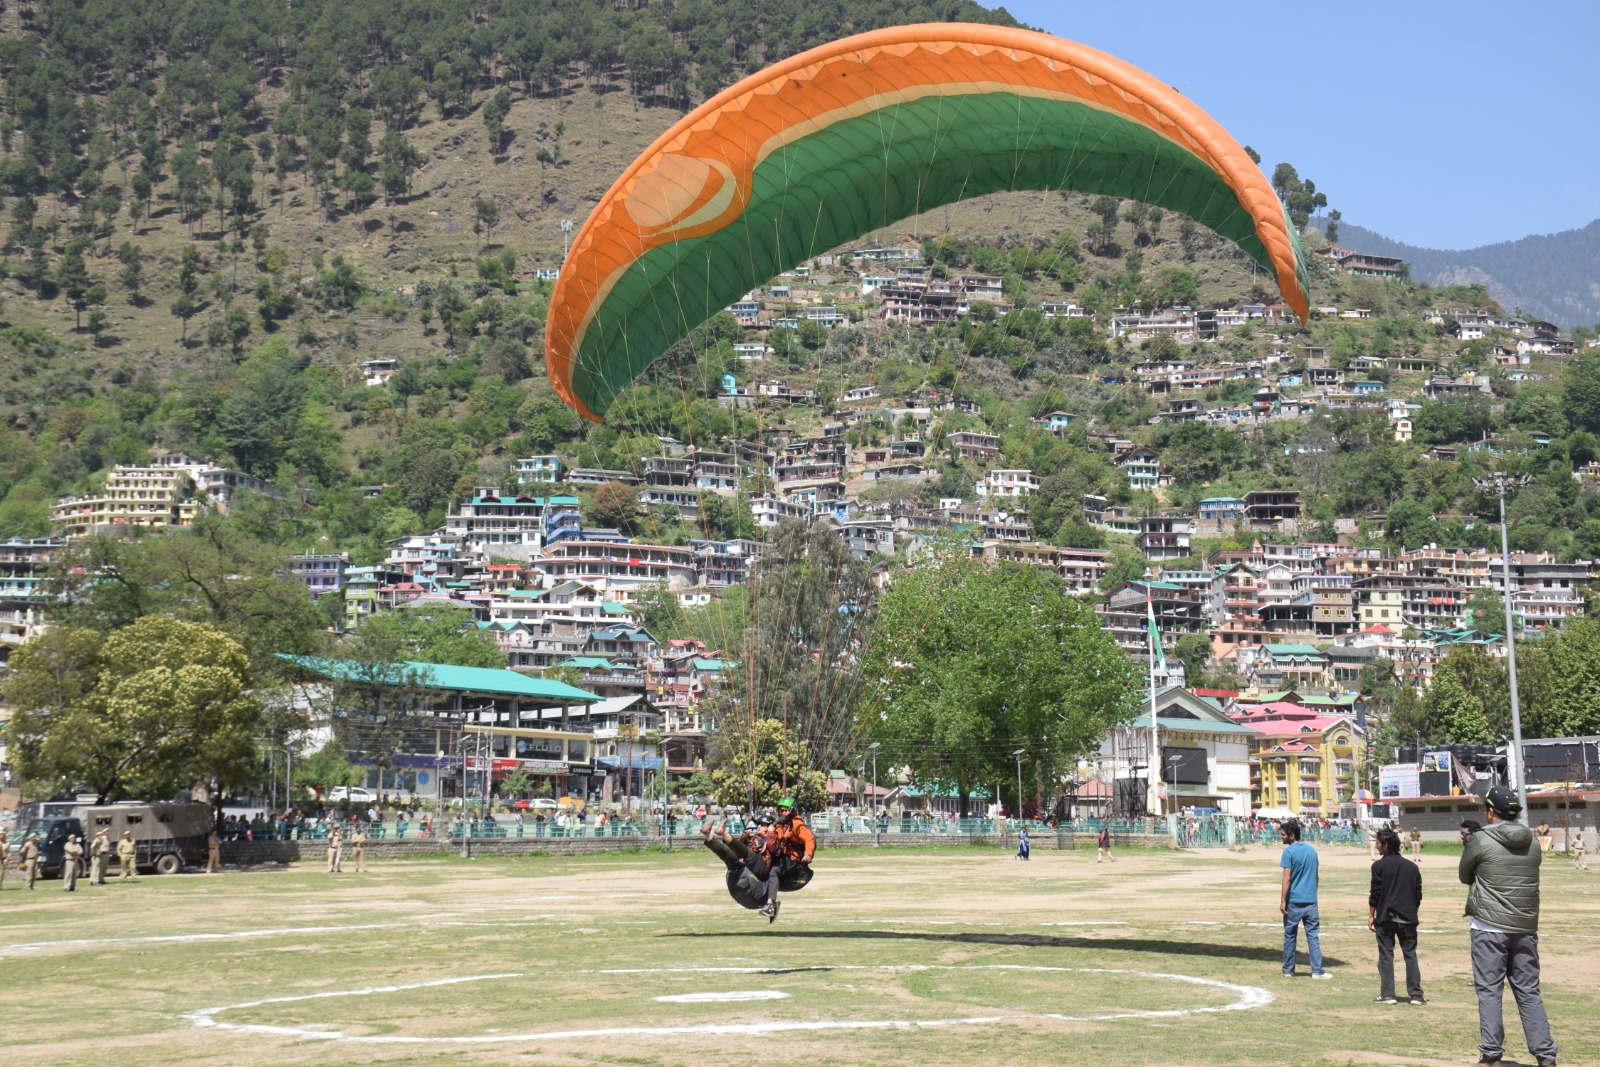 Technical committee inspected Gulaba paragliding site in Kullu